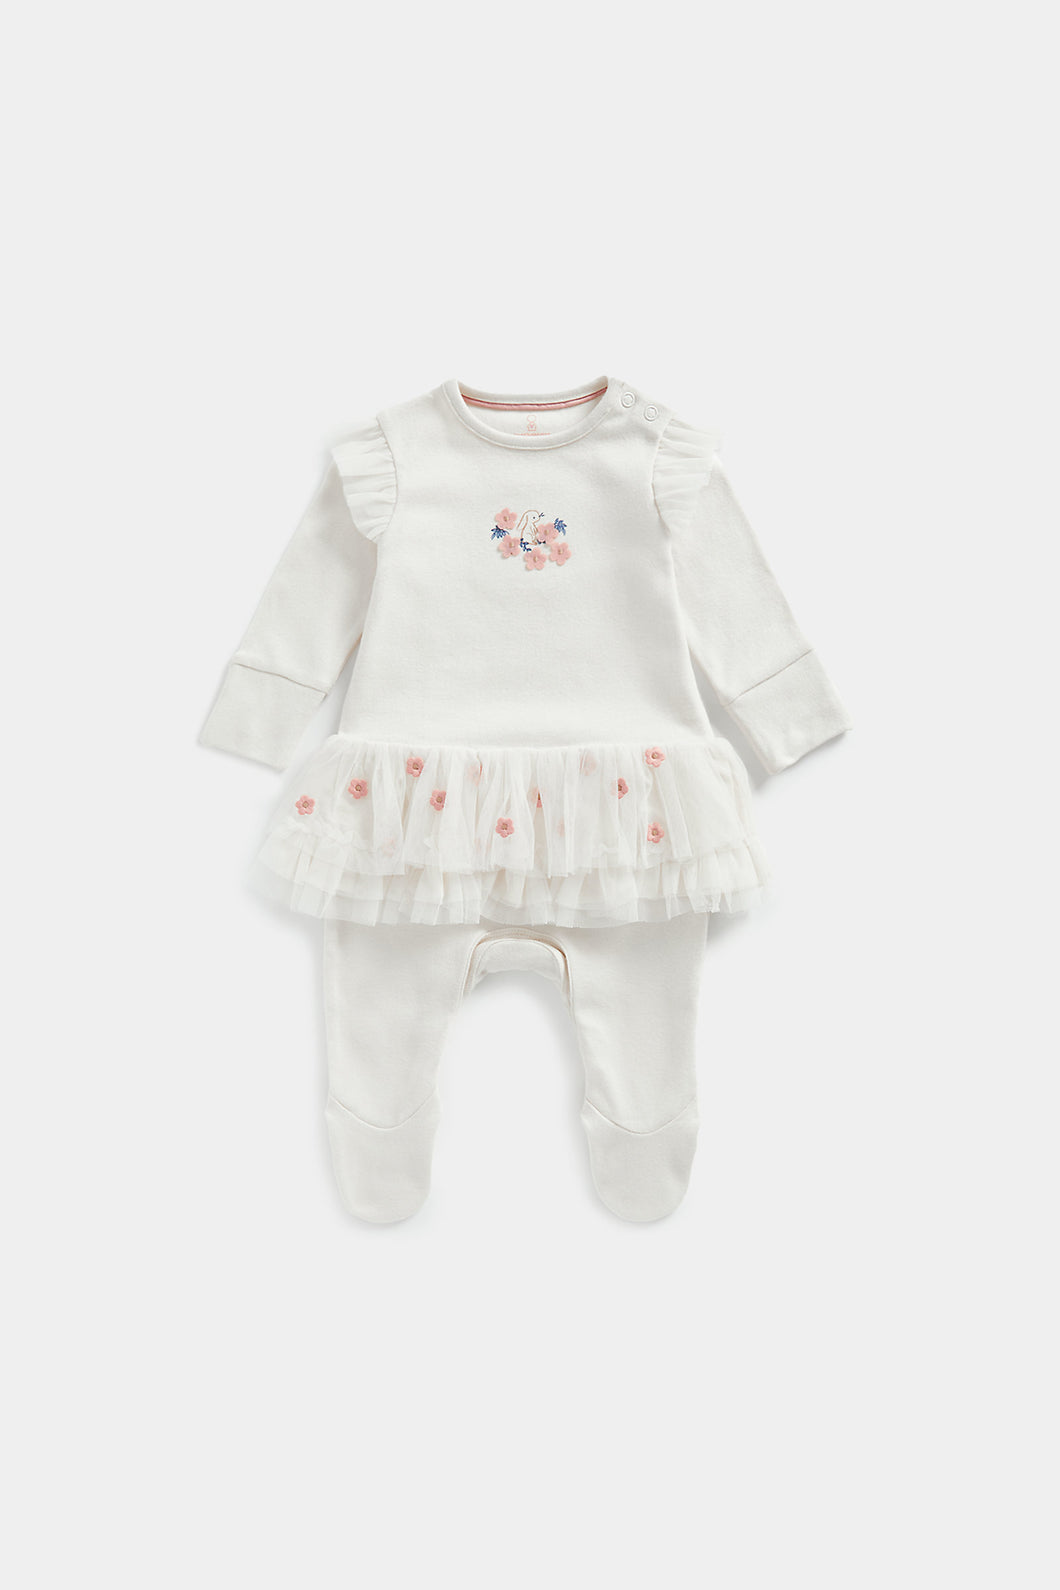 Mothercare Embroidered Tutu All-in-One